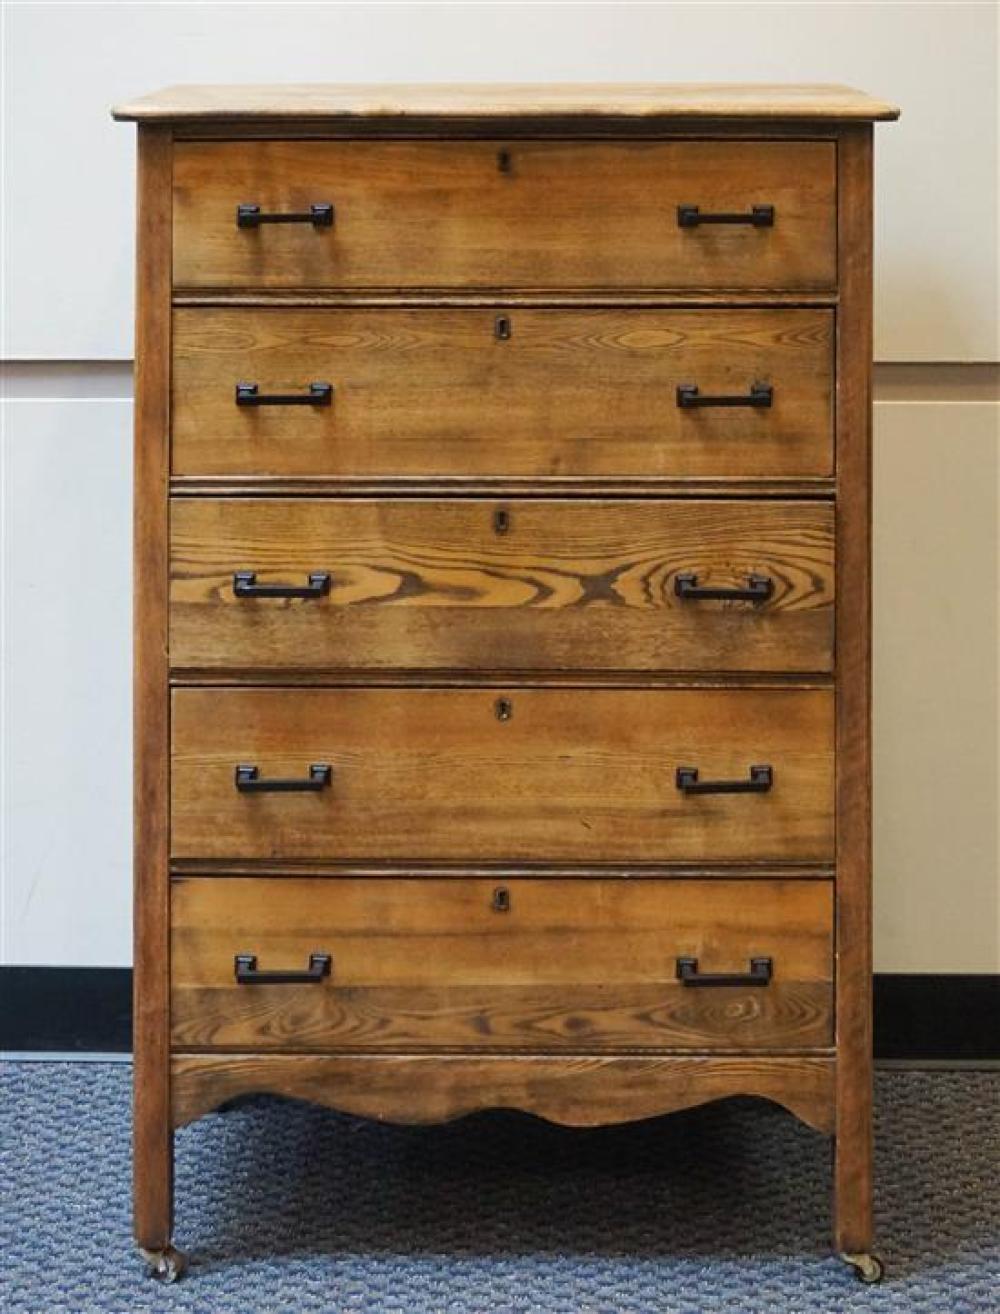 OAK CHEST OF DRAWERSOak Chest of